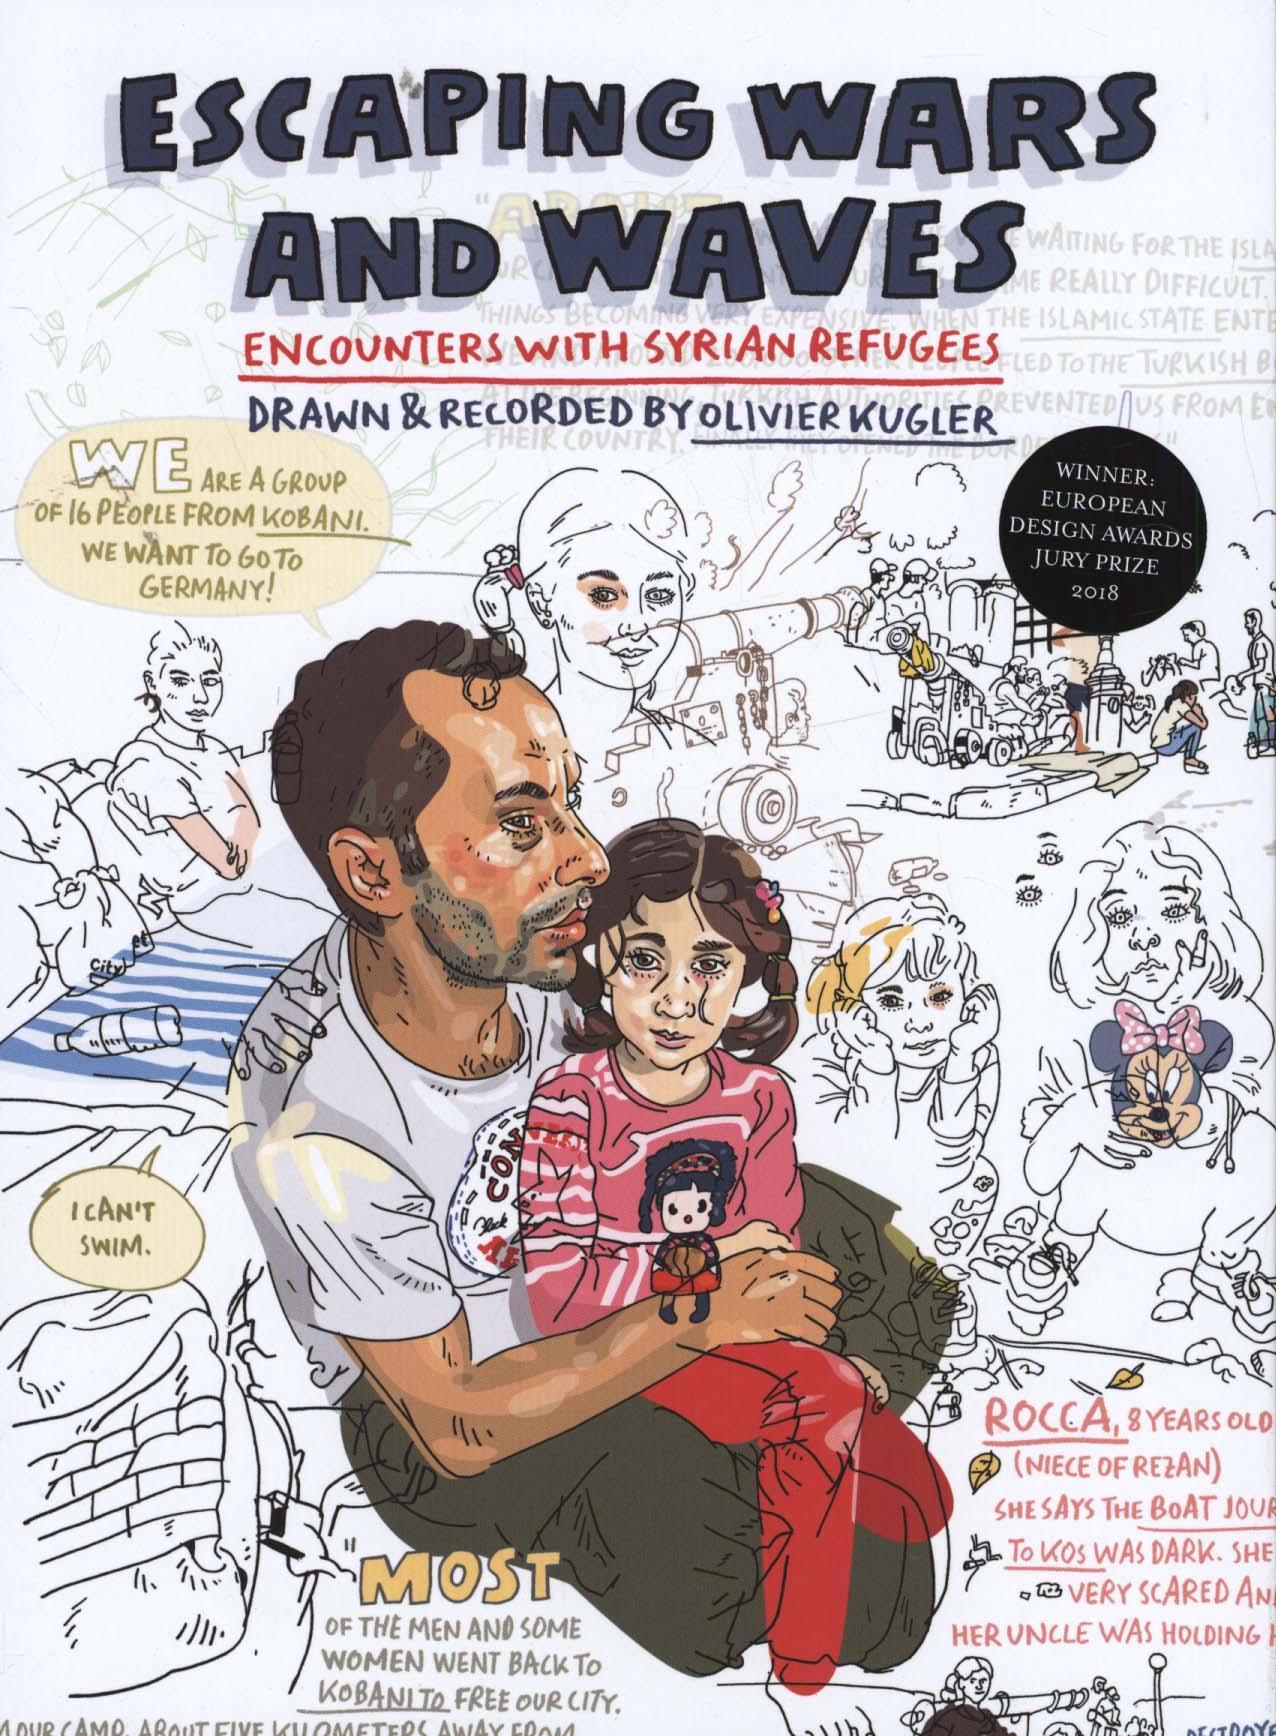 Escaping Wars and Waves - Olivier Kugler